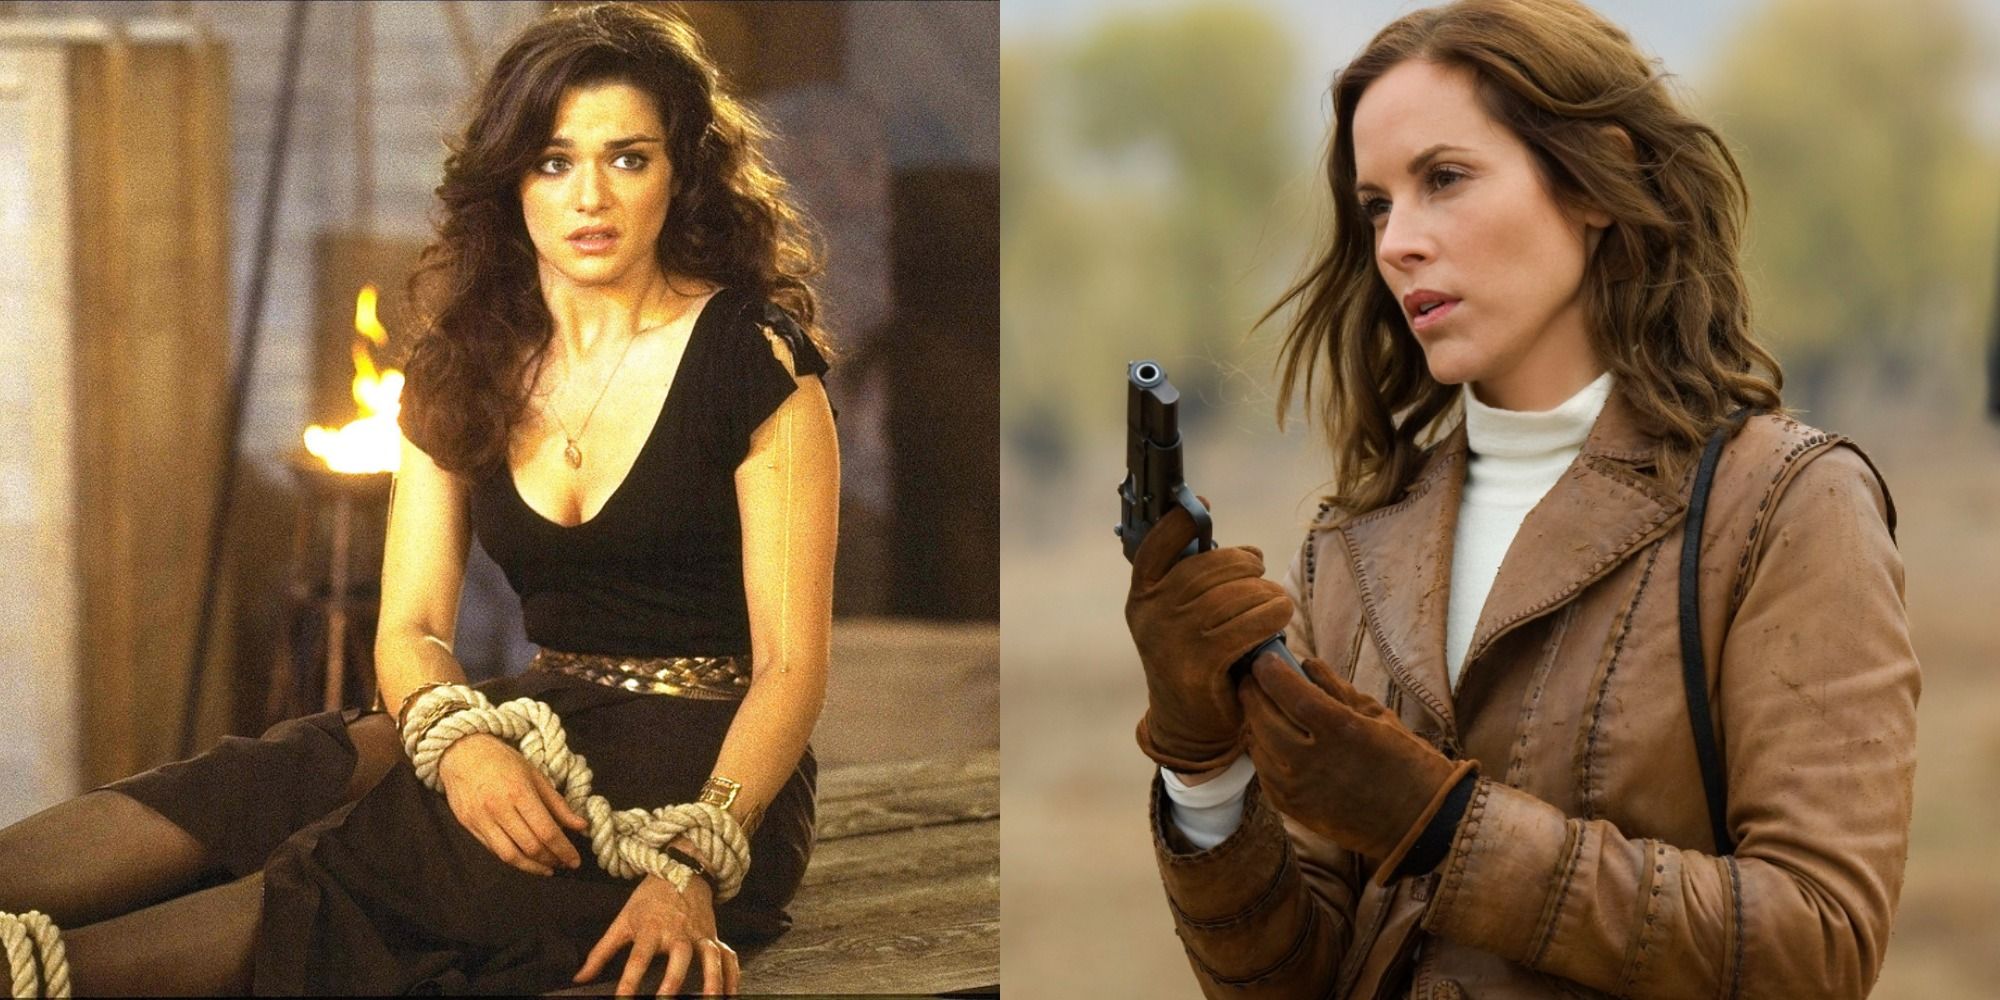 Side by side images of Rachel Weisz and Maria Bello as Evelyn Carnahan in The Mummy films